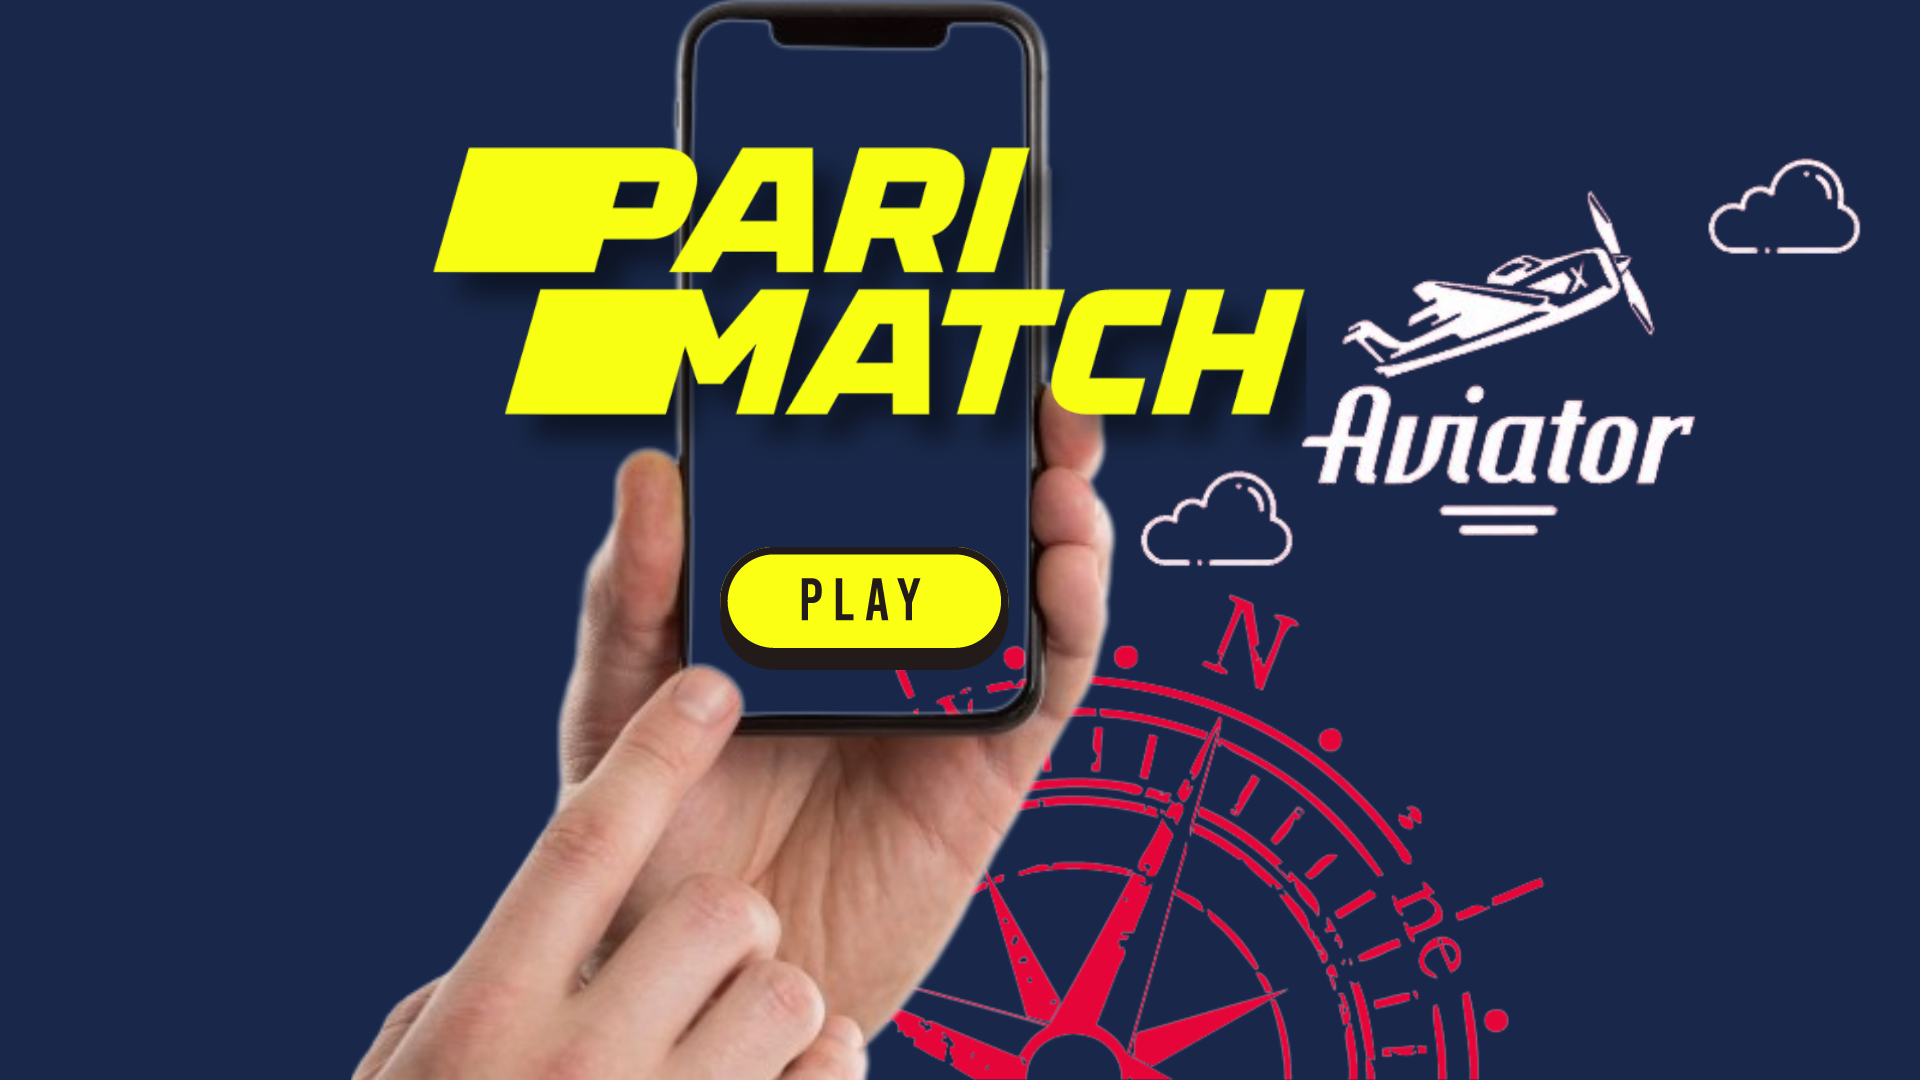 A hand holding a smart phone with the word parimatch aviator app on it

